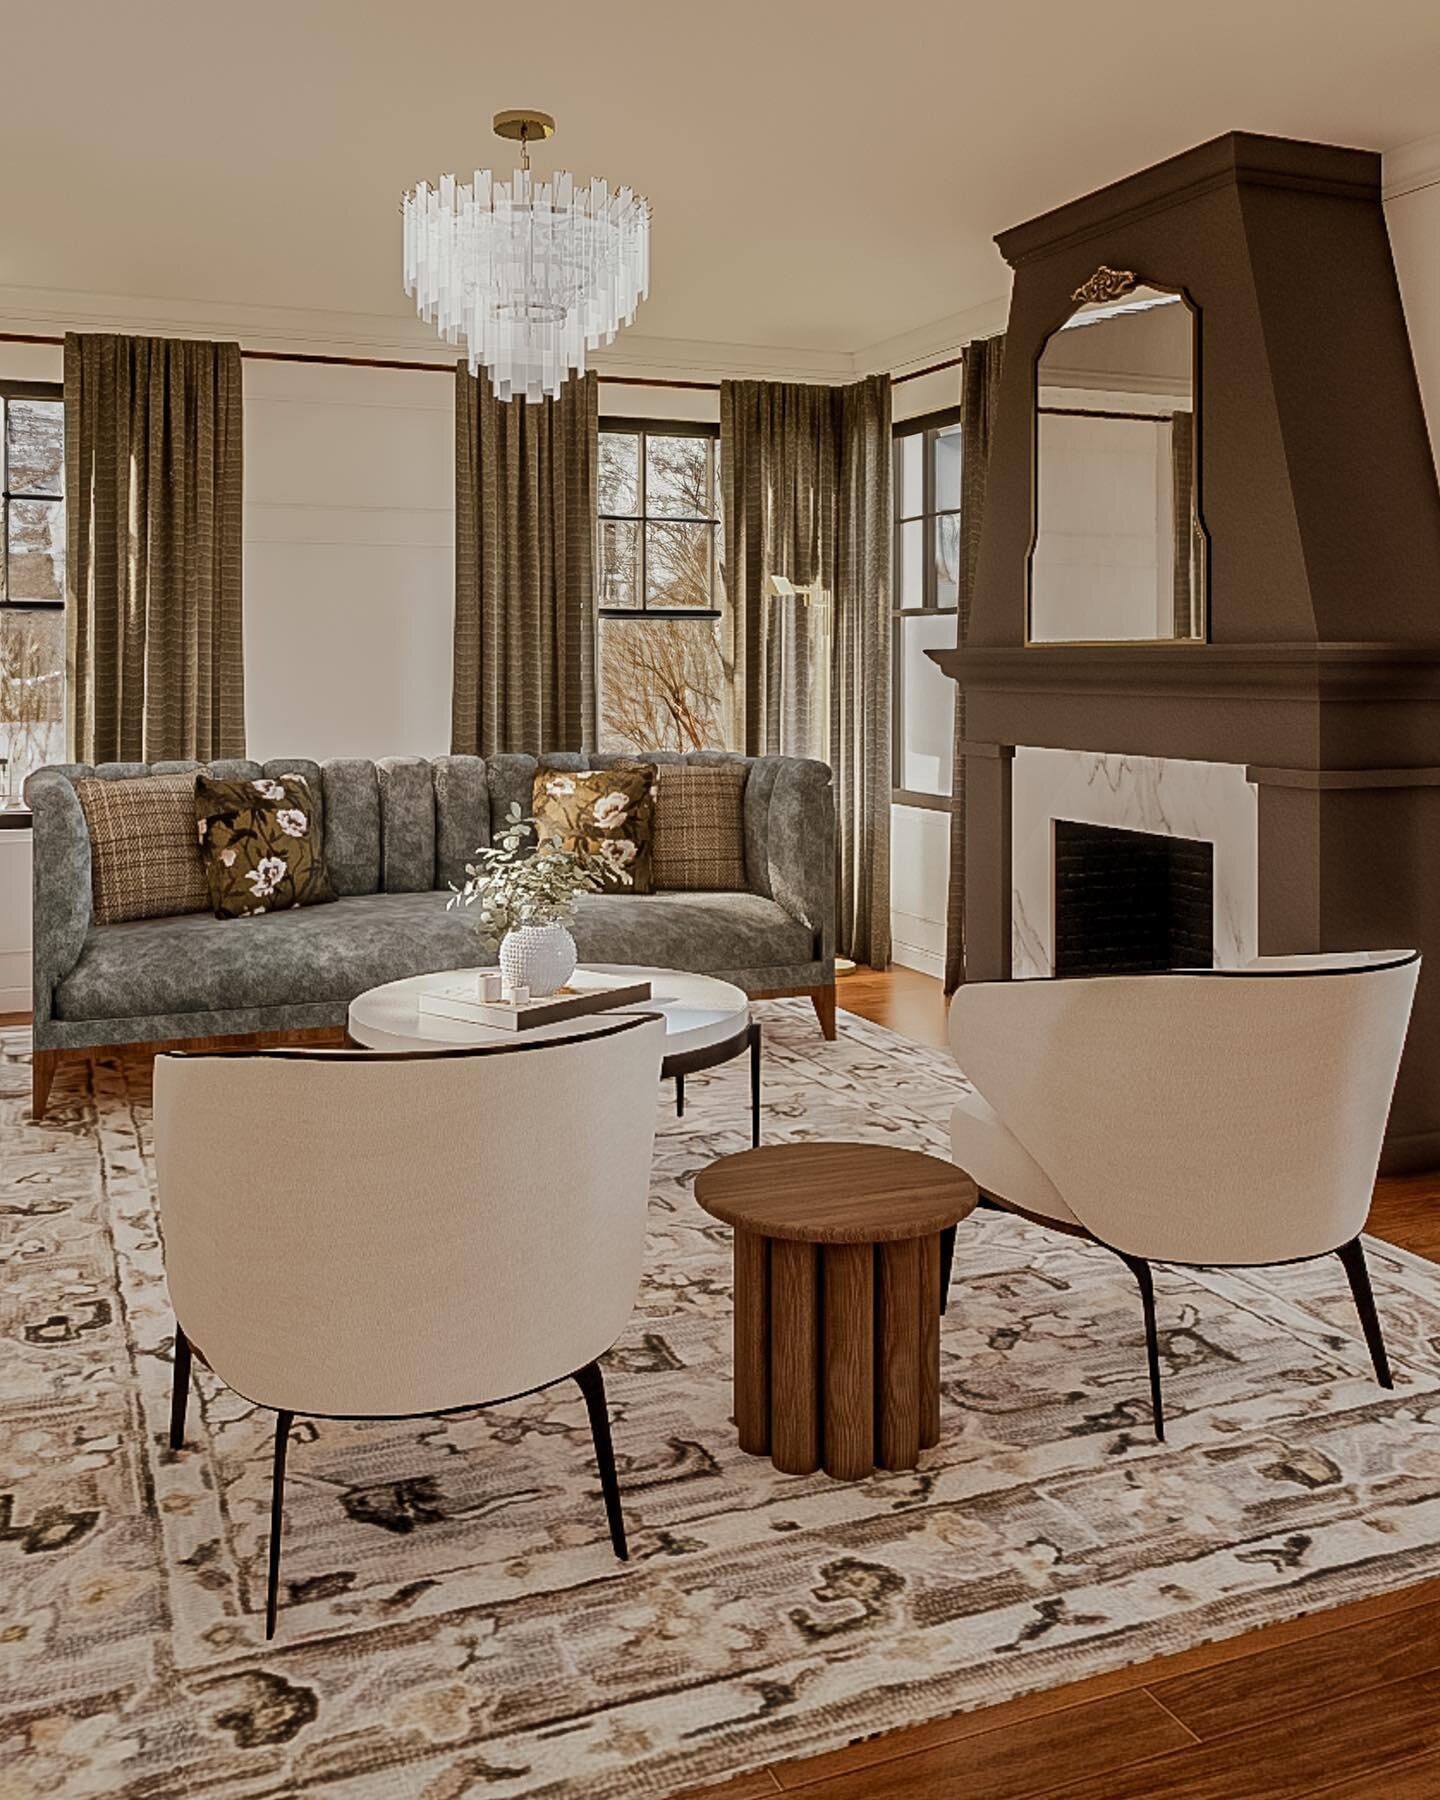 We&rsquo;re bringing back all the charm to this Tudor living room. Reworking the fireplace from boring and builder grade to period perfect along with a new chandelier helps to elevate this room. New furnishings and window treatments bring it all toge